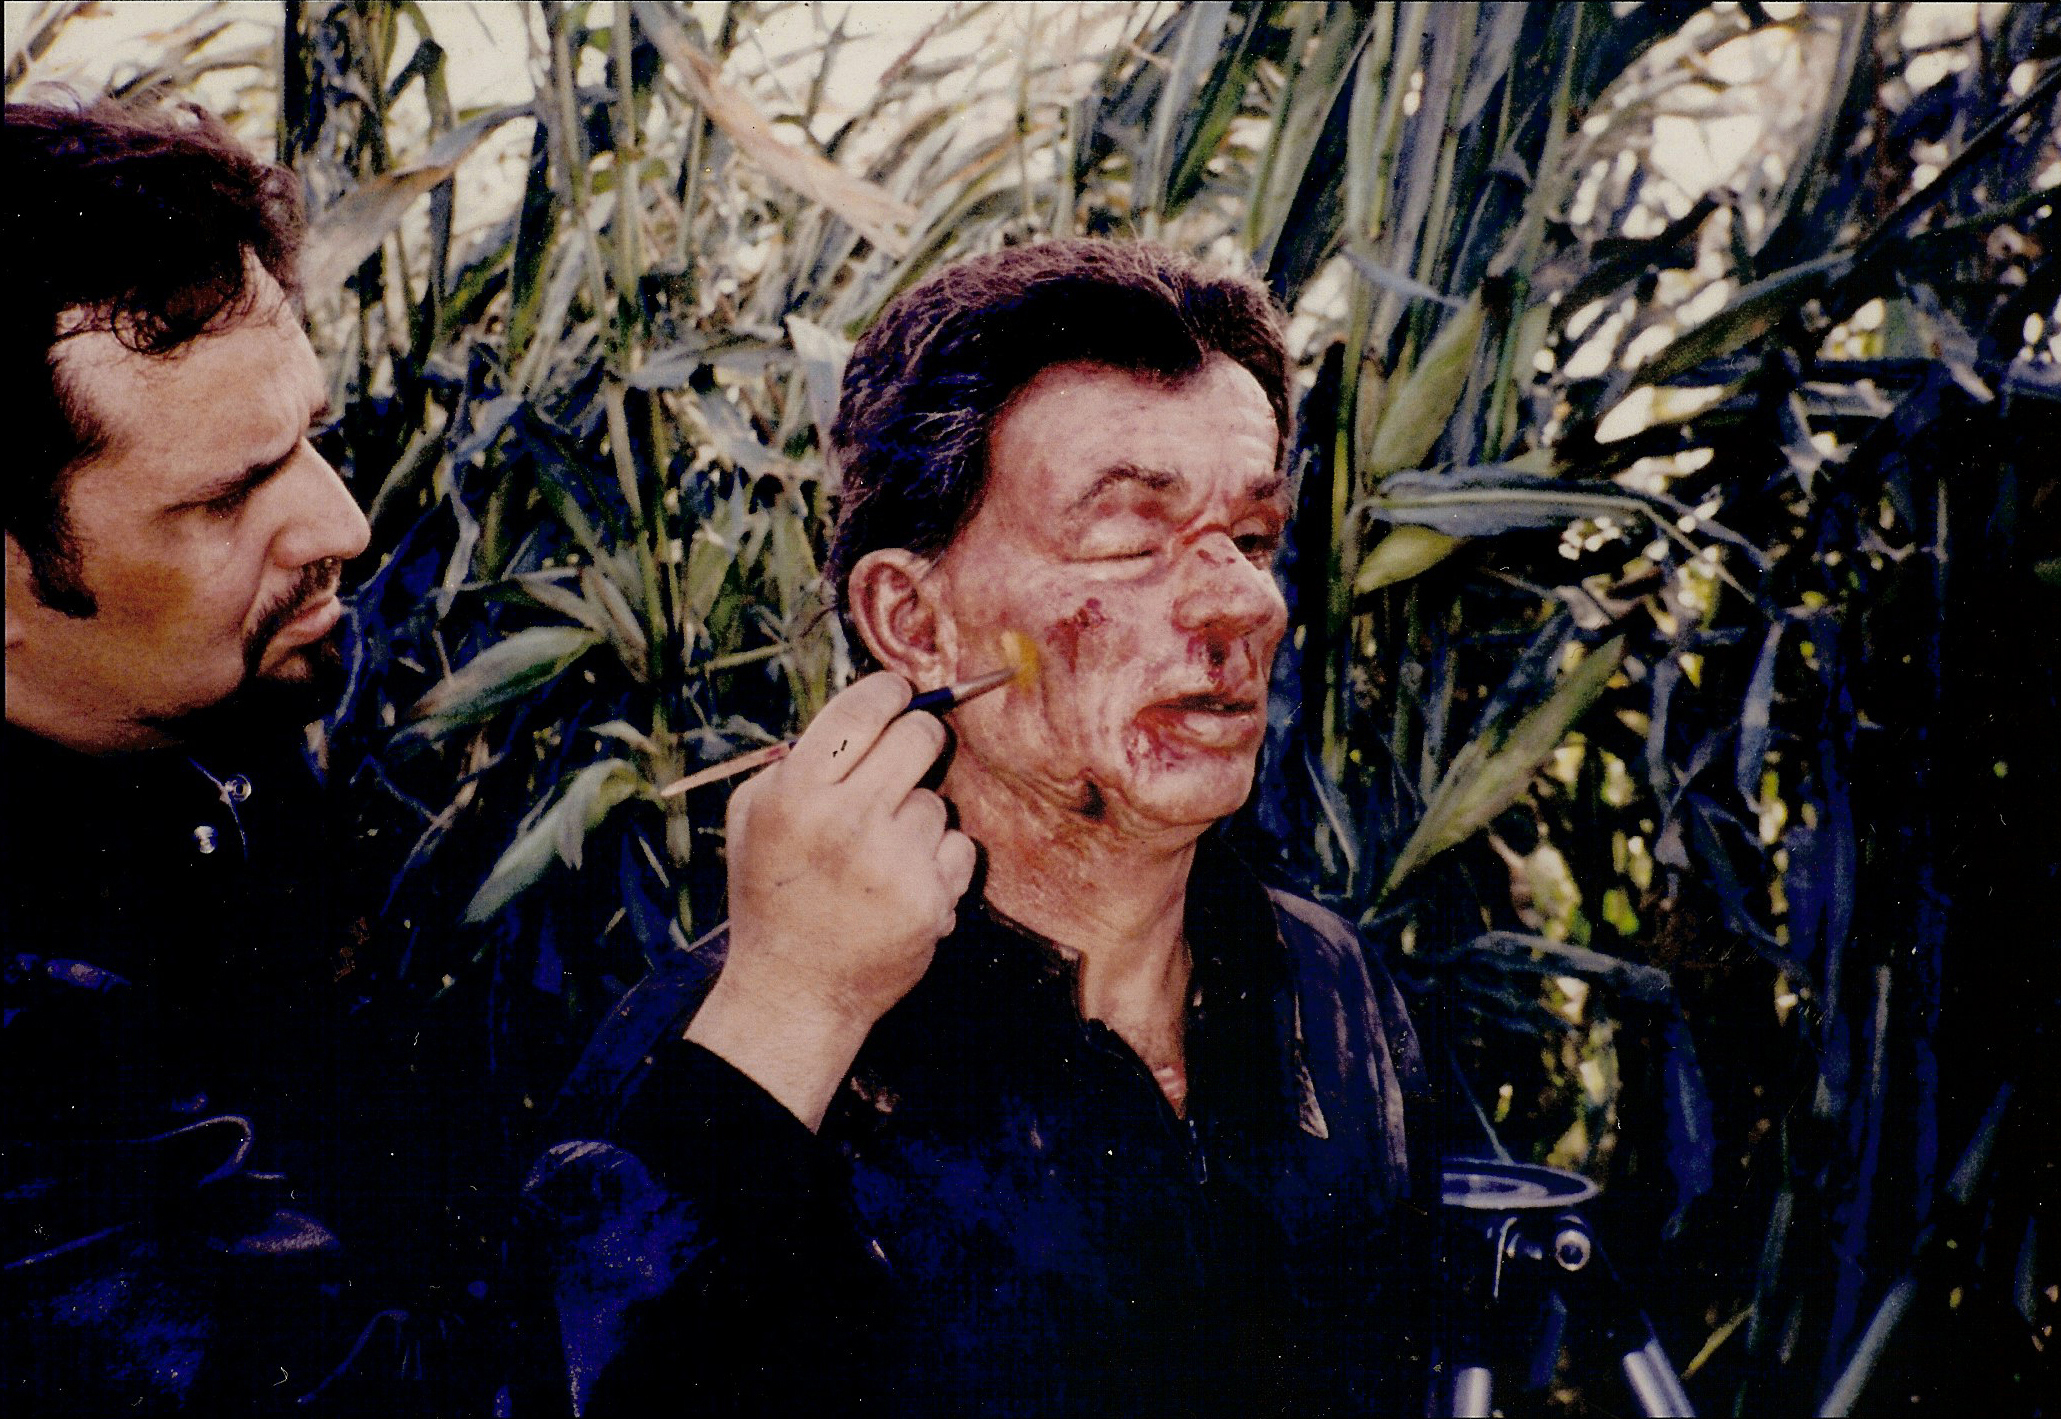 Ken Diaz applies final color adjustments to the Bat Beating prosthetic makeup on Phillip Suriano as Dominick Santoro, on the set of 